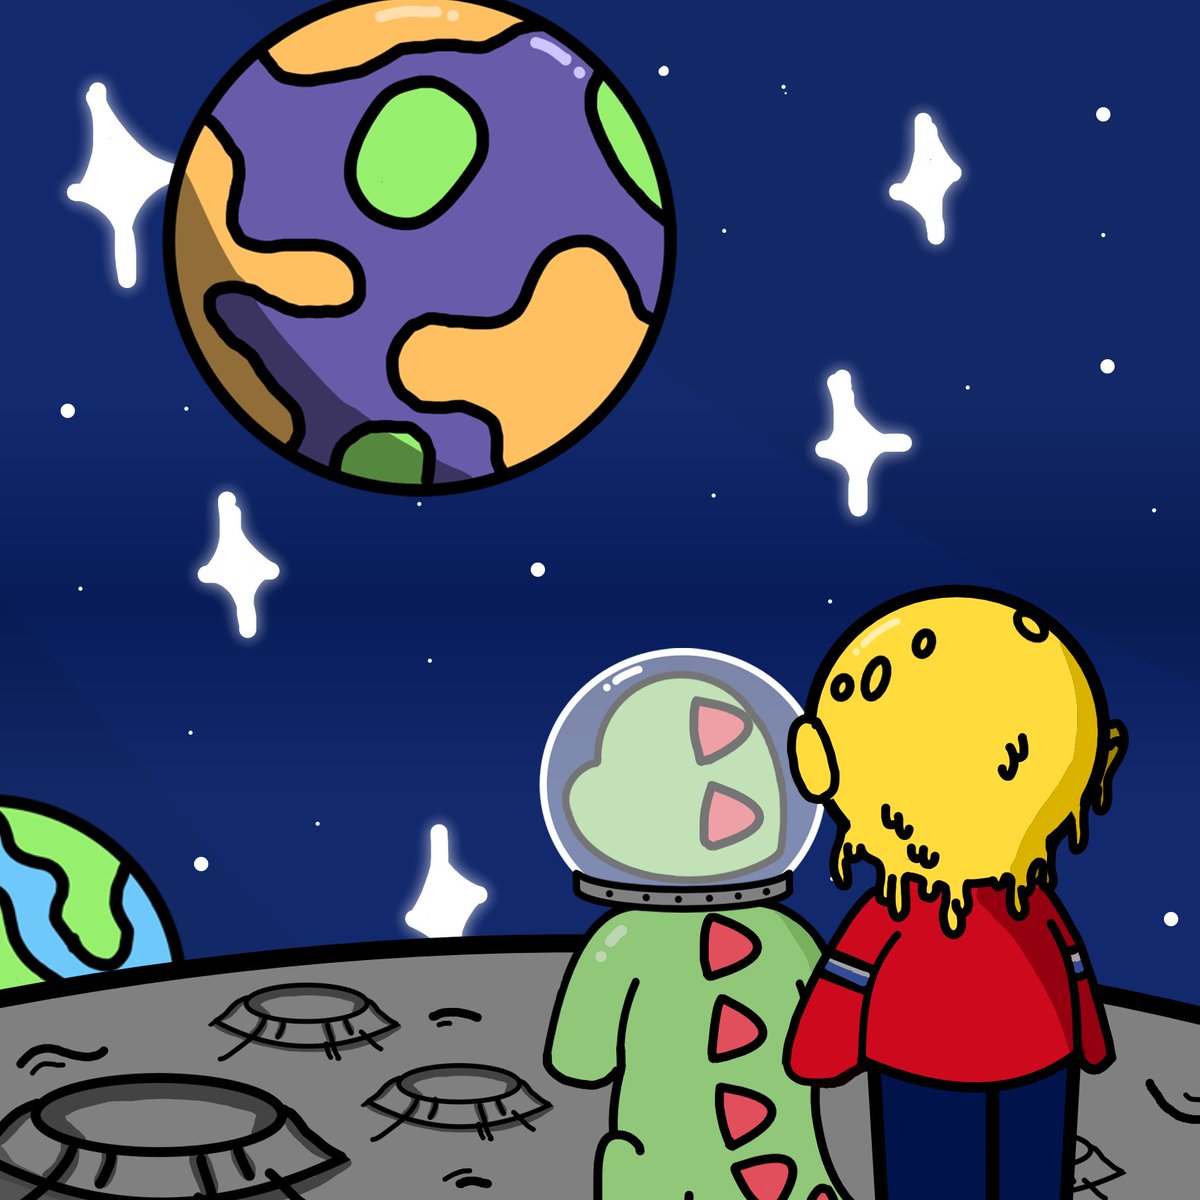 Grakie visiting good friend Melting Moonboy to show them Grakies World, hopefully they'll come visit sometime⭐️🚀 5 Winners of allowlist for Melting Moonboy: To win🏆 🌕 RT + Like 🌕 Follow @meltingmoonboy & grakiescnft 🌕 Tag a friend Good Luck Grakies #CNFTGiveaway #CNFT